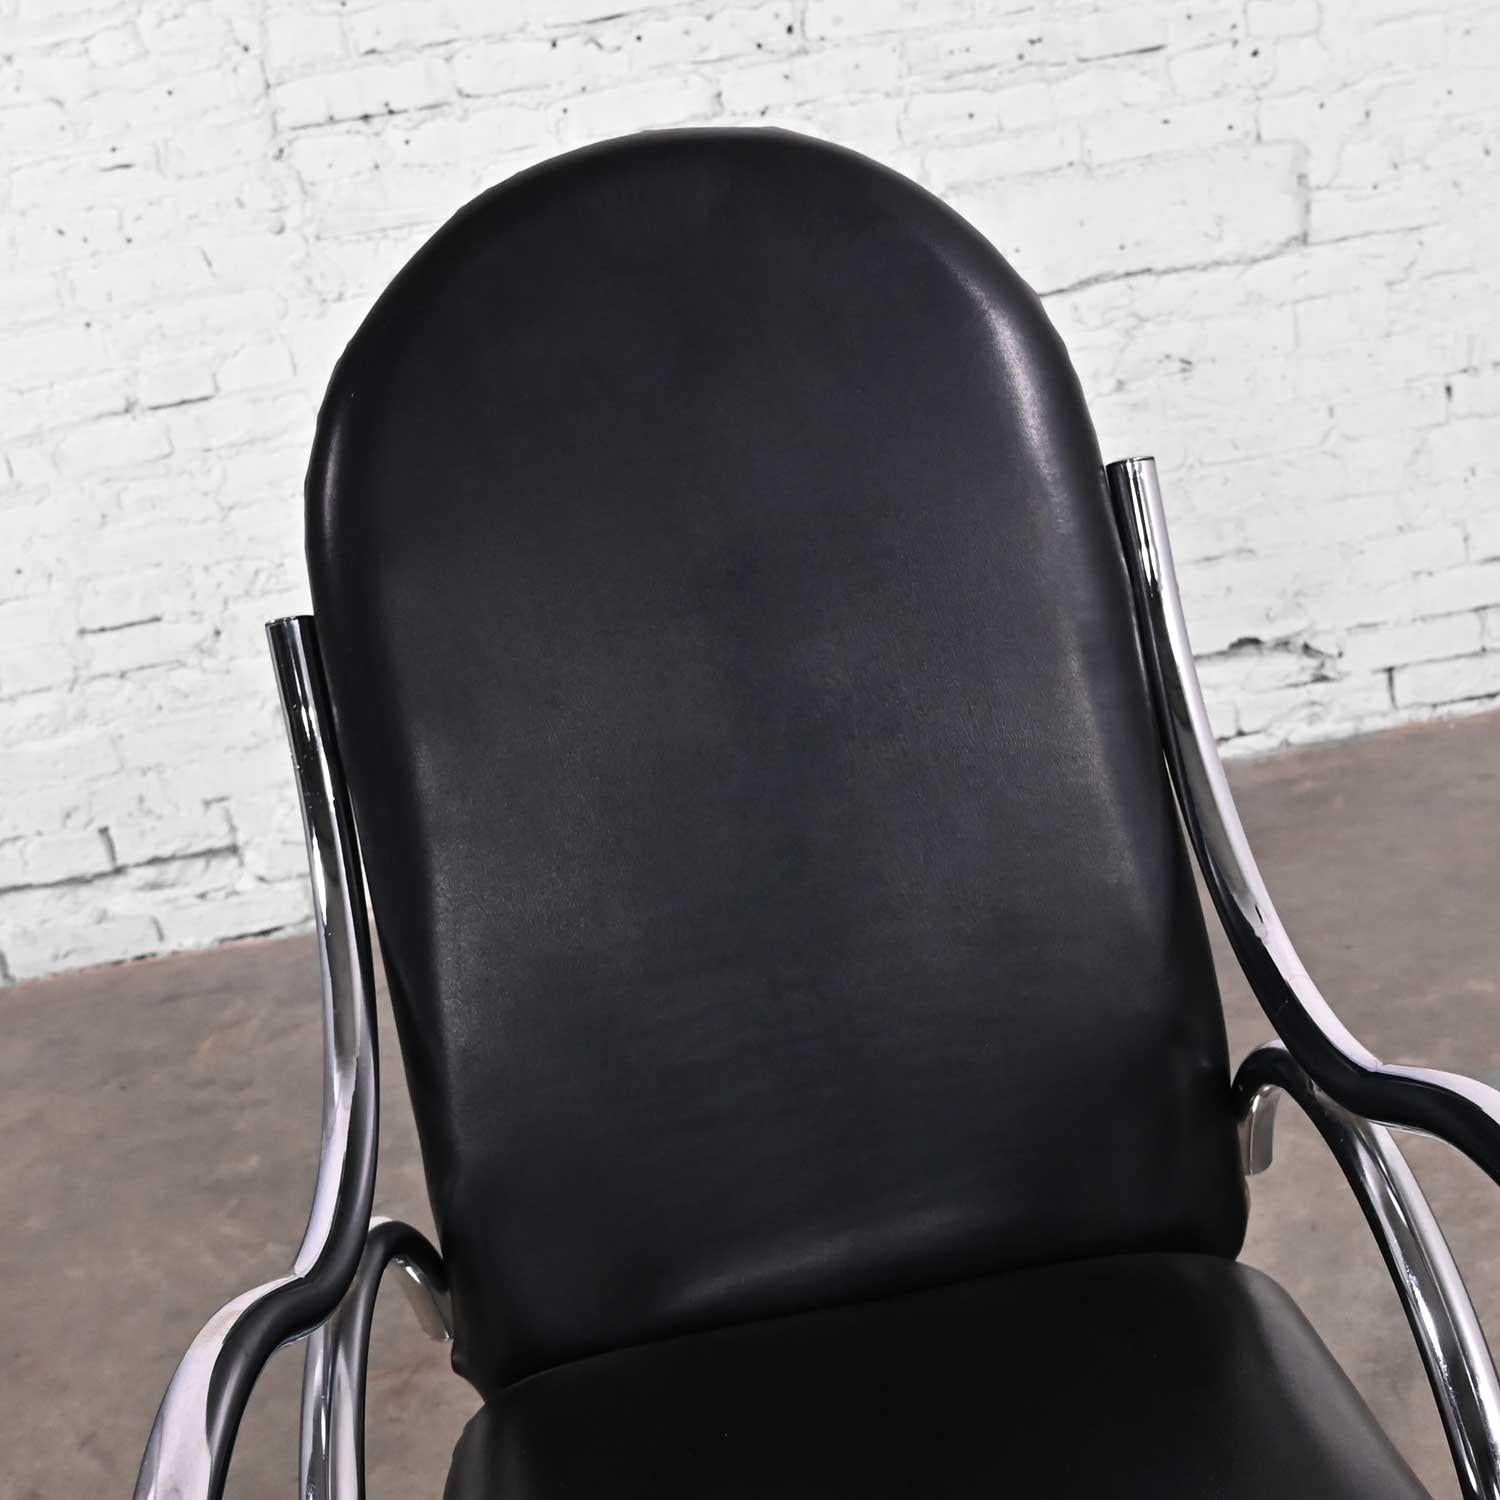 Bauhaus Style Black Vinyl & Chrome Bentwood Style Rocking Chair After Thonet For Sale 1